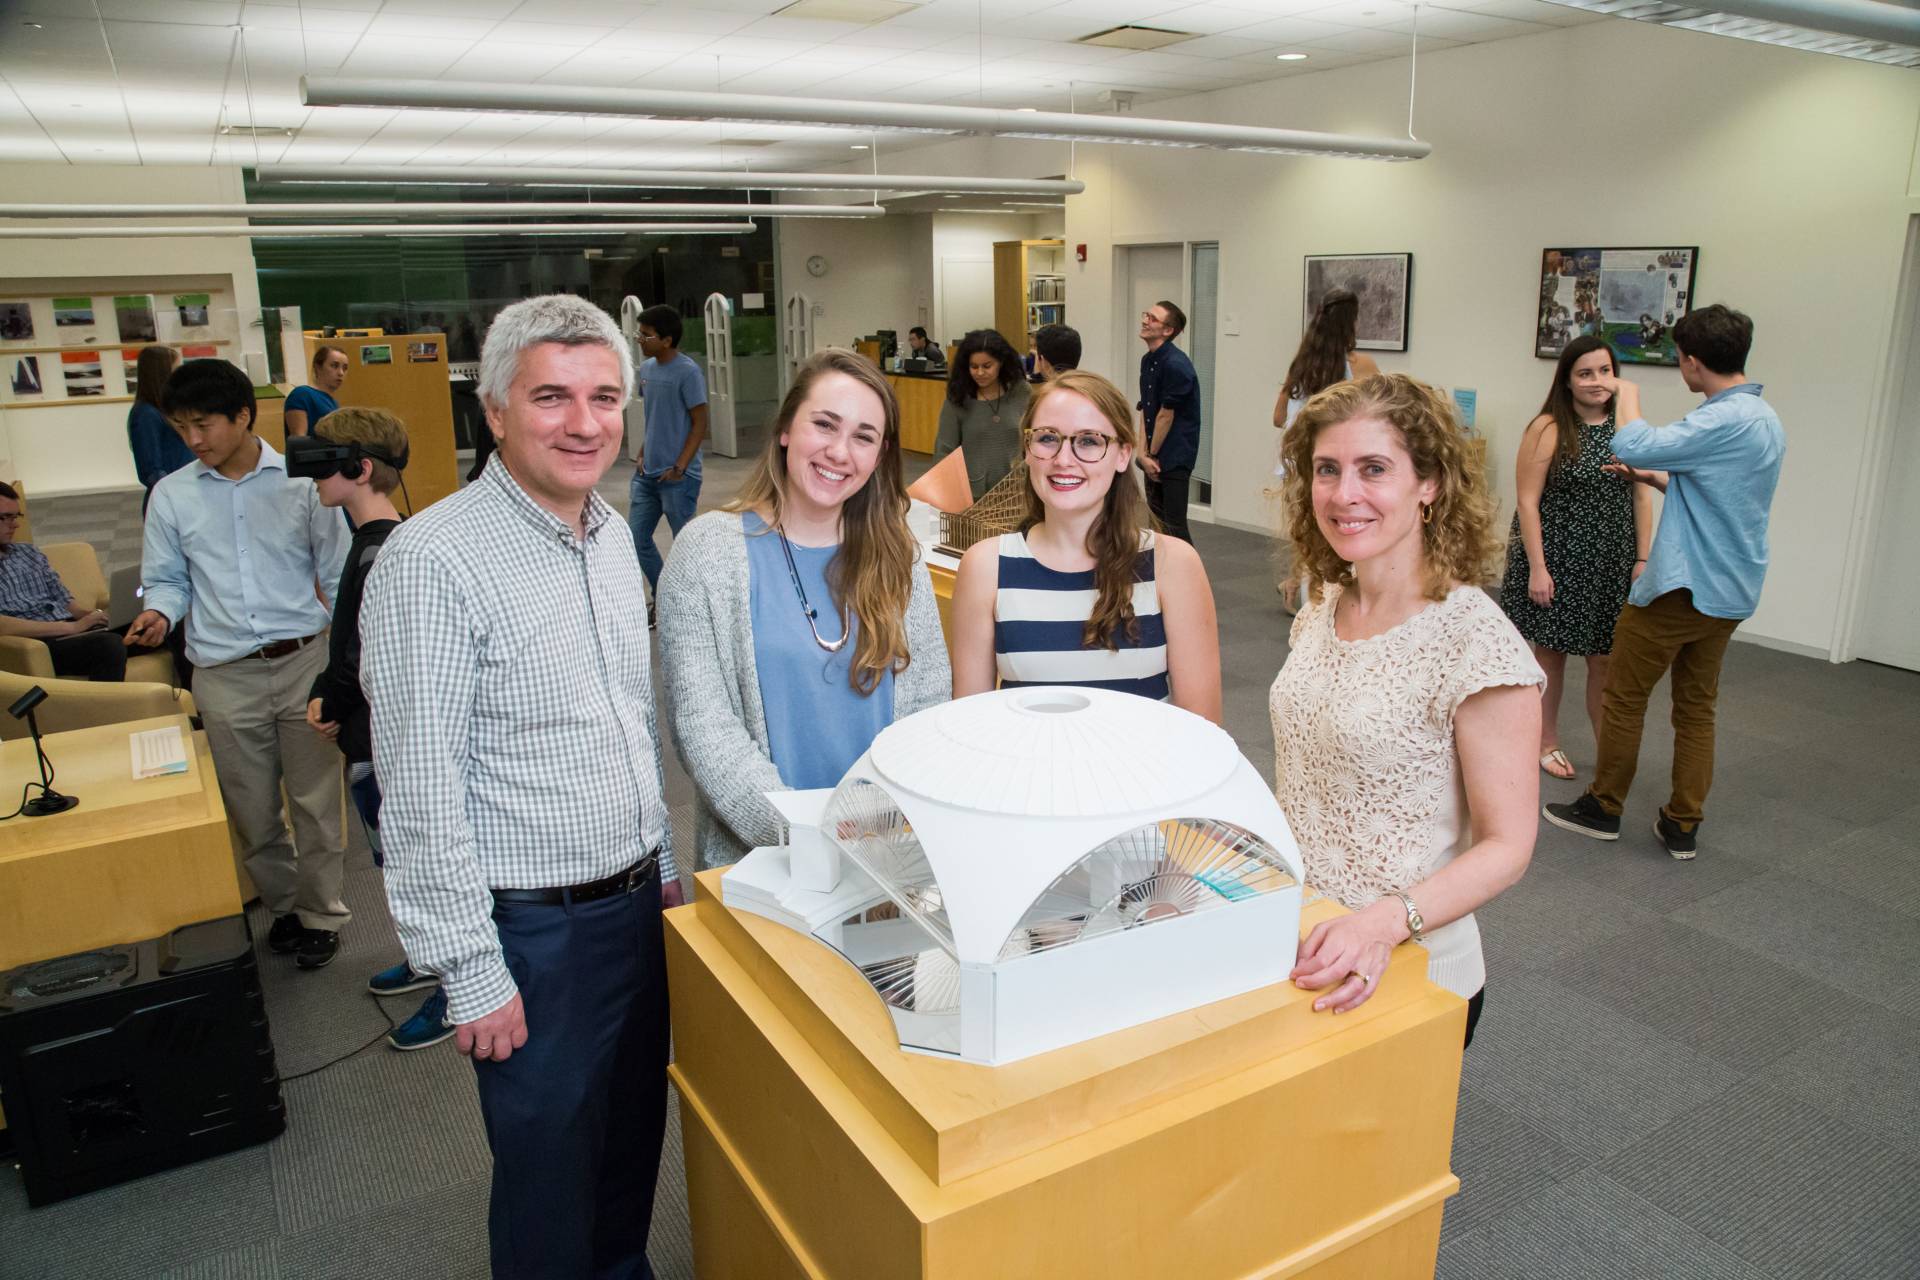 Isabella Douglas standing with architecture model and professors